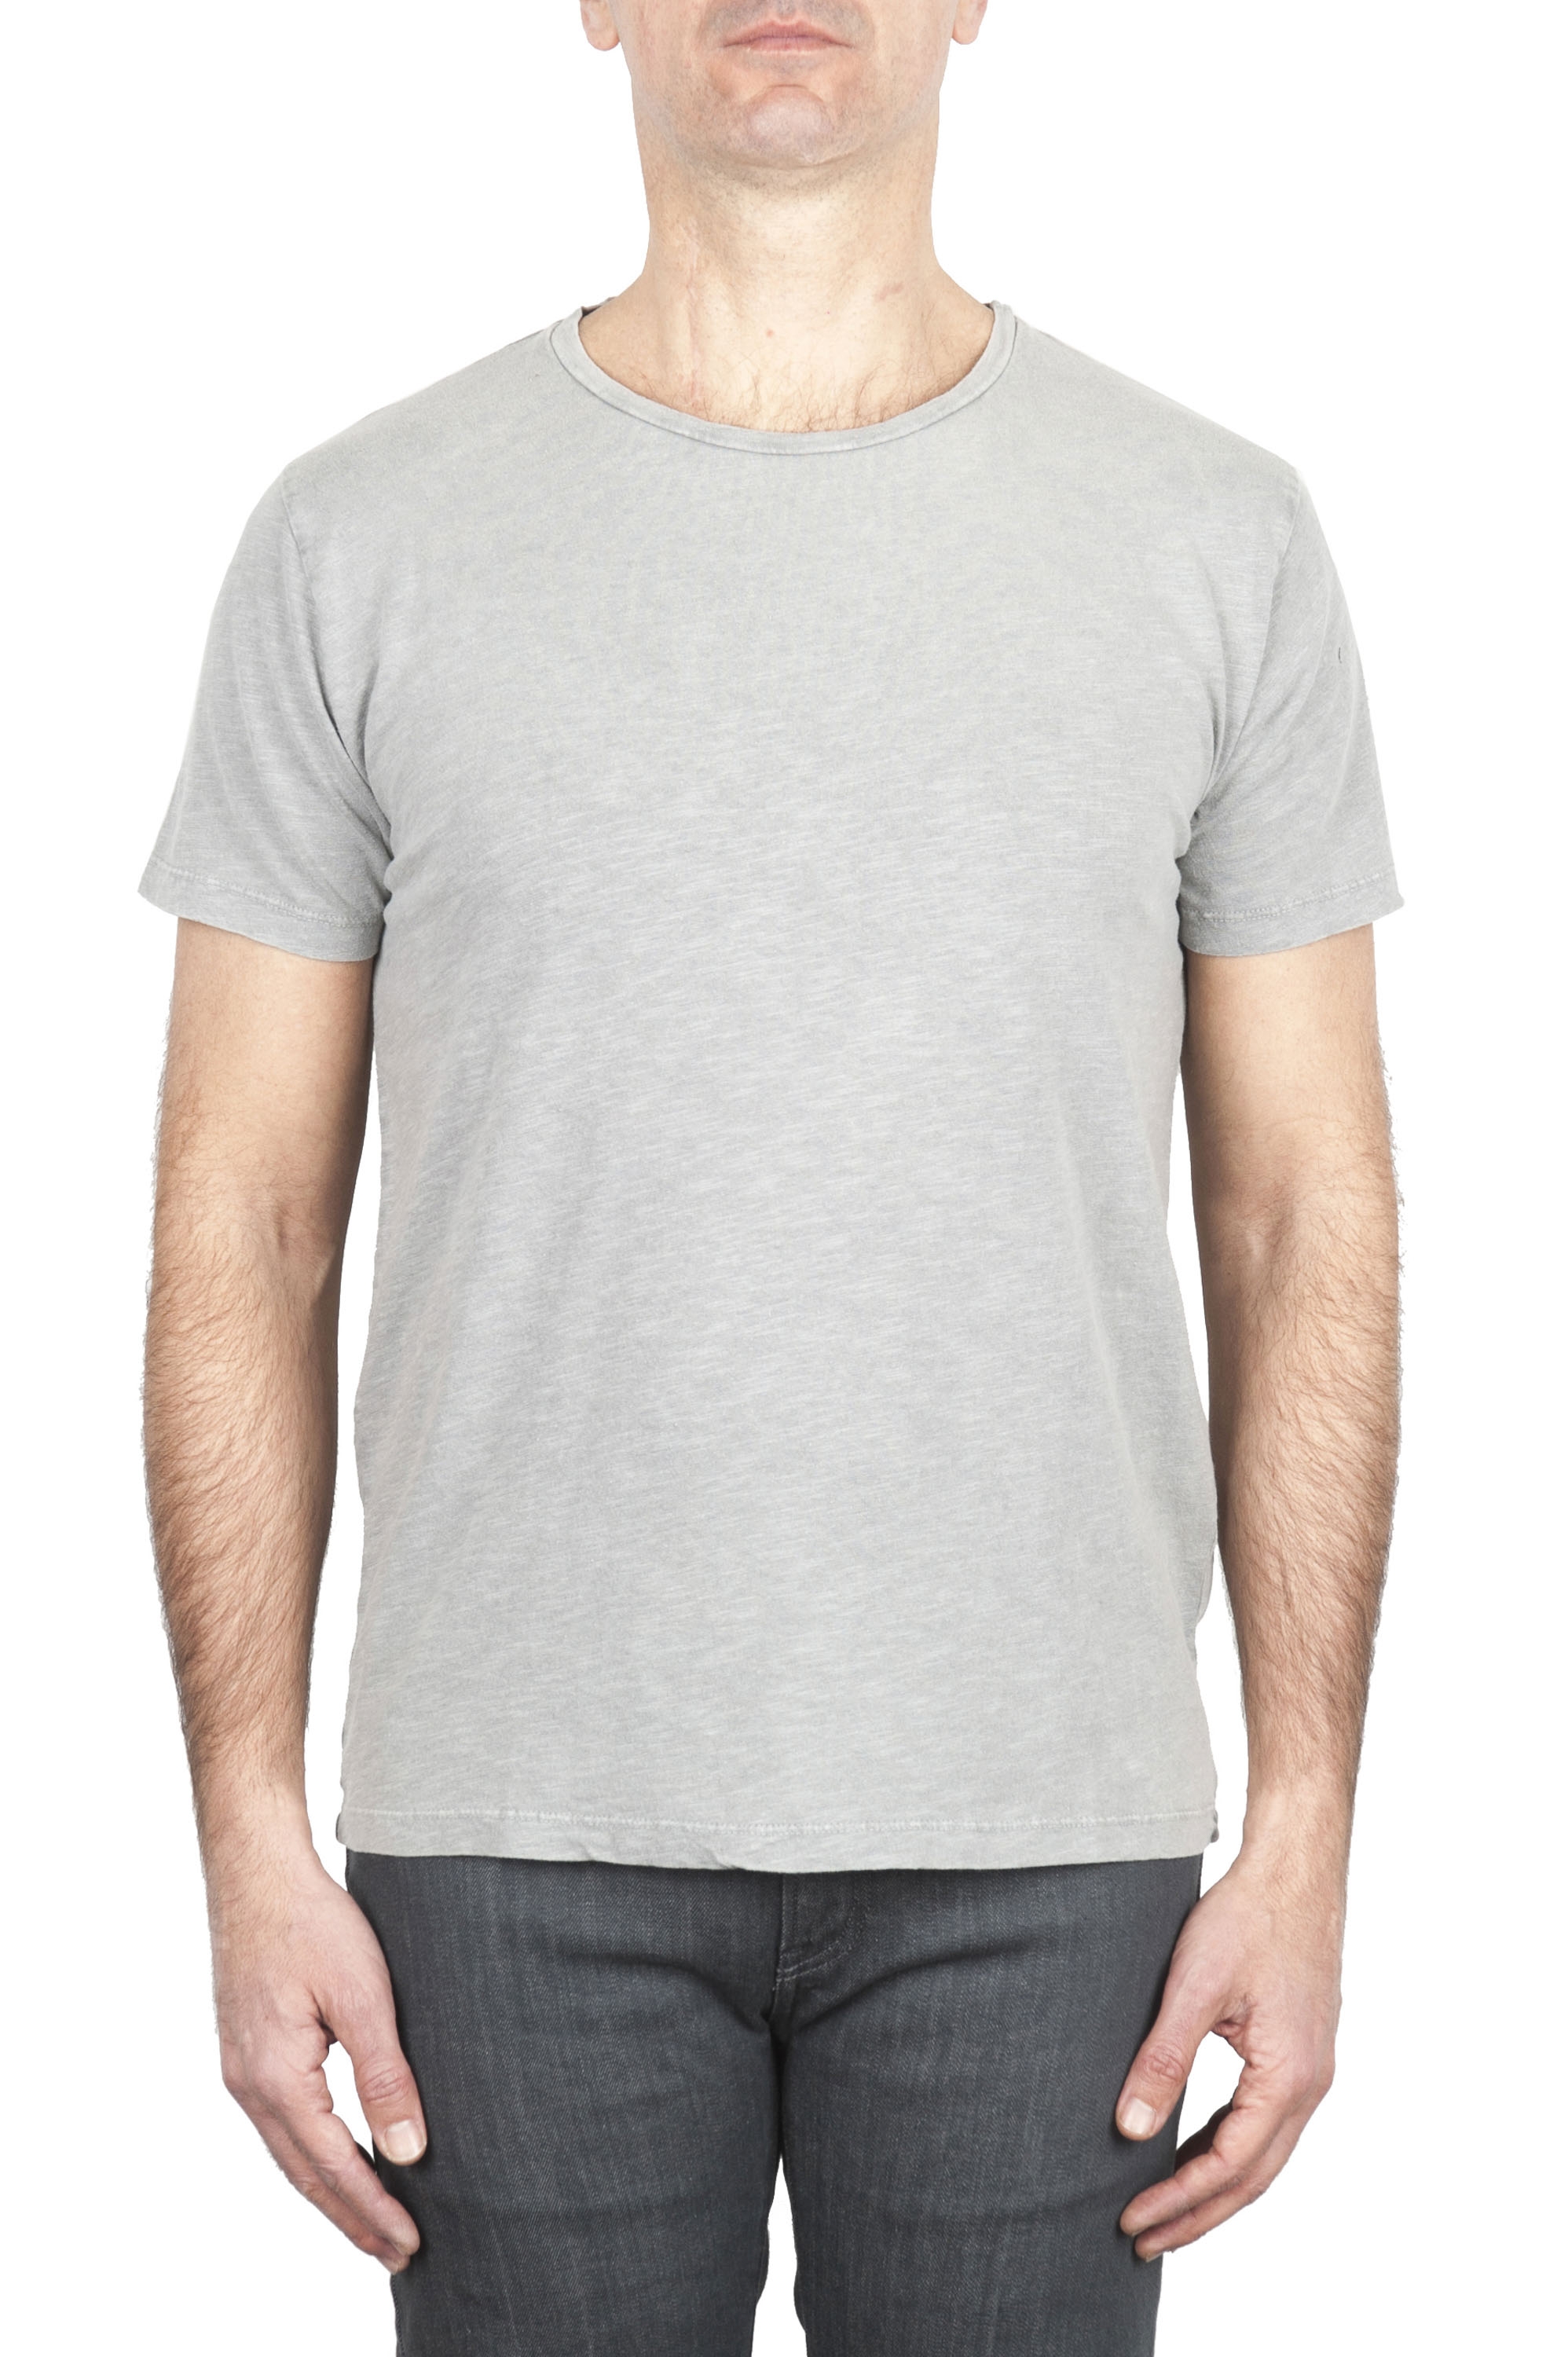 SBU 03063_2020AW Flamed cotton scoop neck t-shirt pearl grey 01